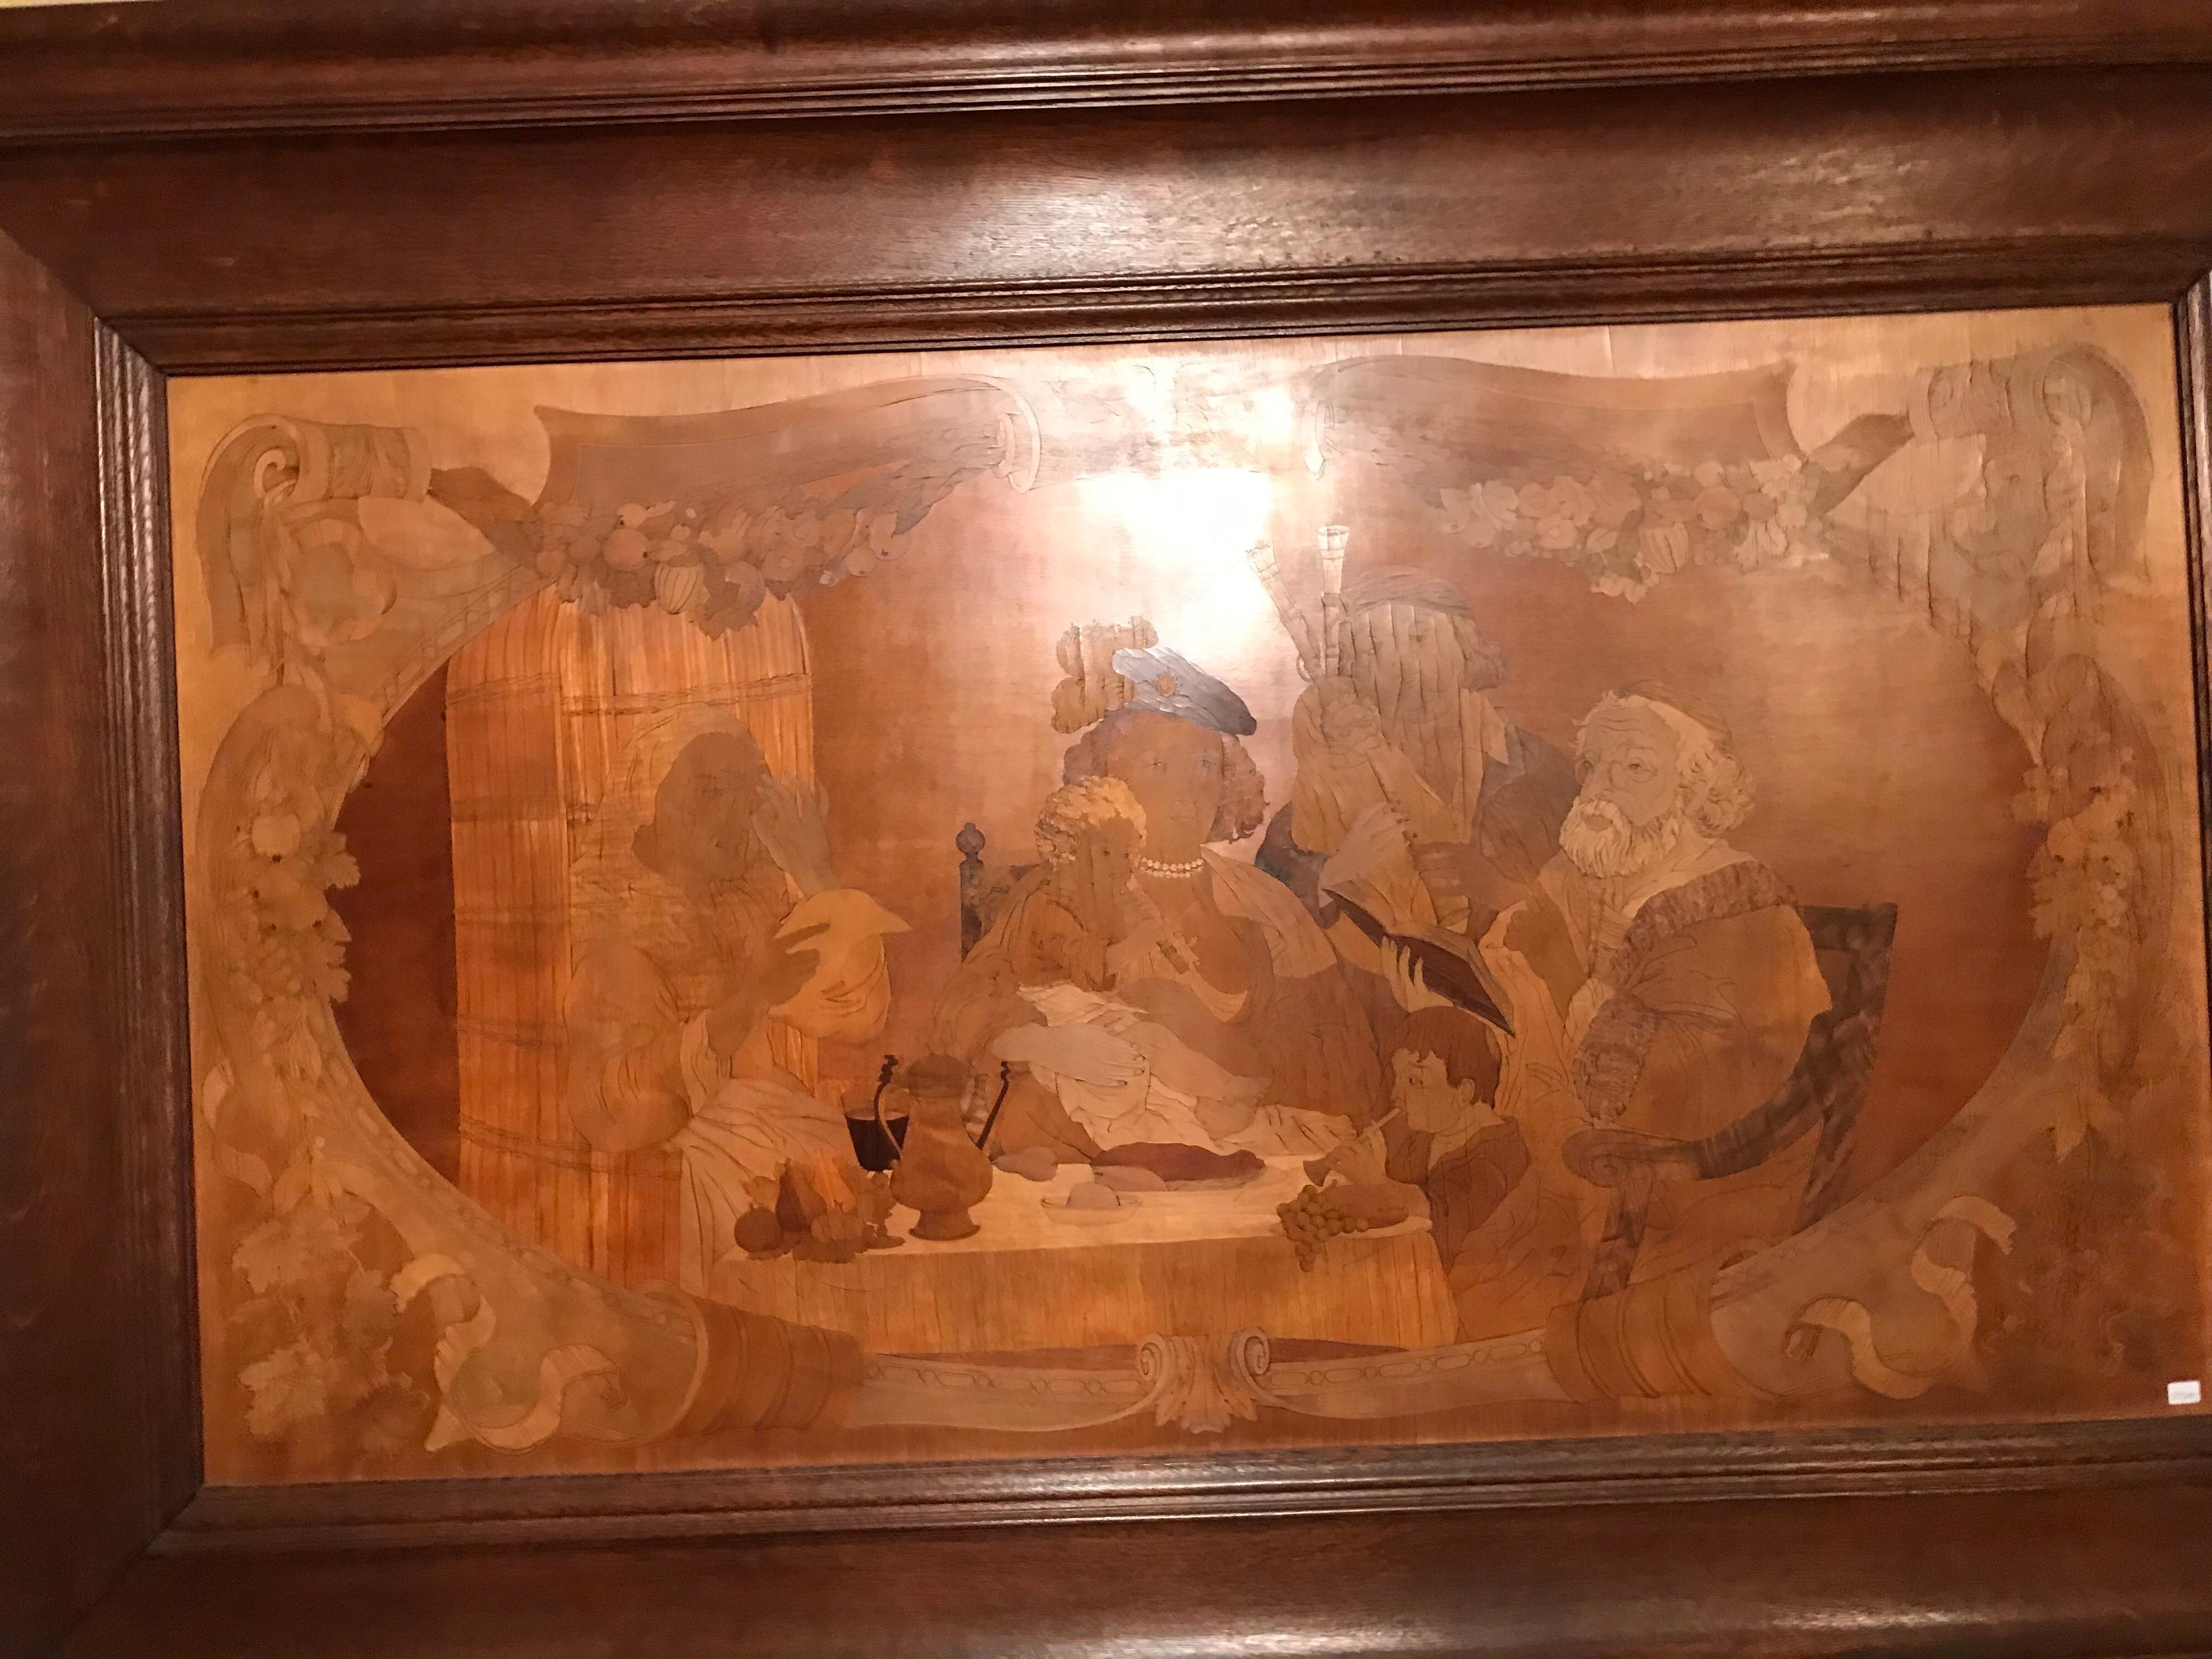 Inlay Monumental Old Wood Inlaid Mural, Signed W. V. Naive Art For Sale